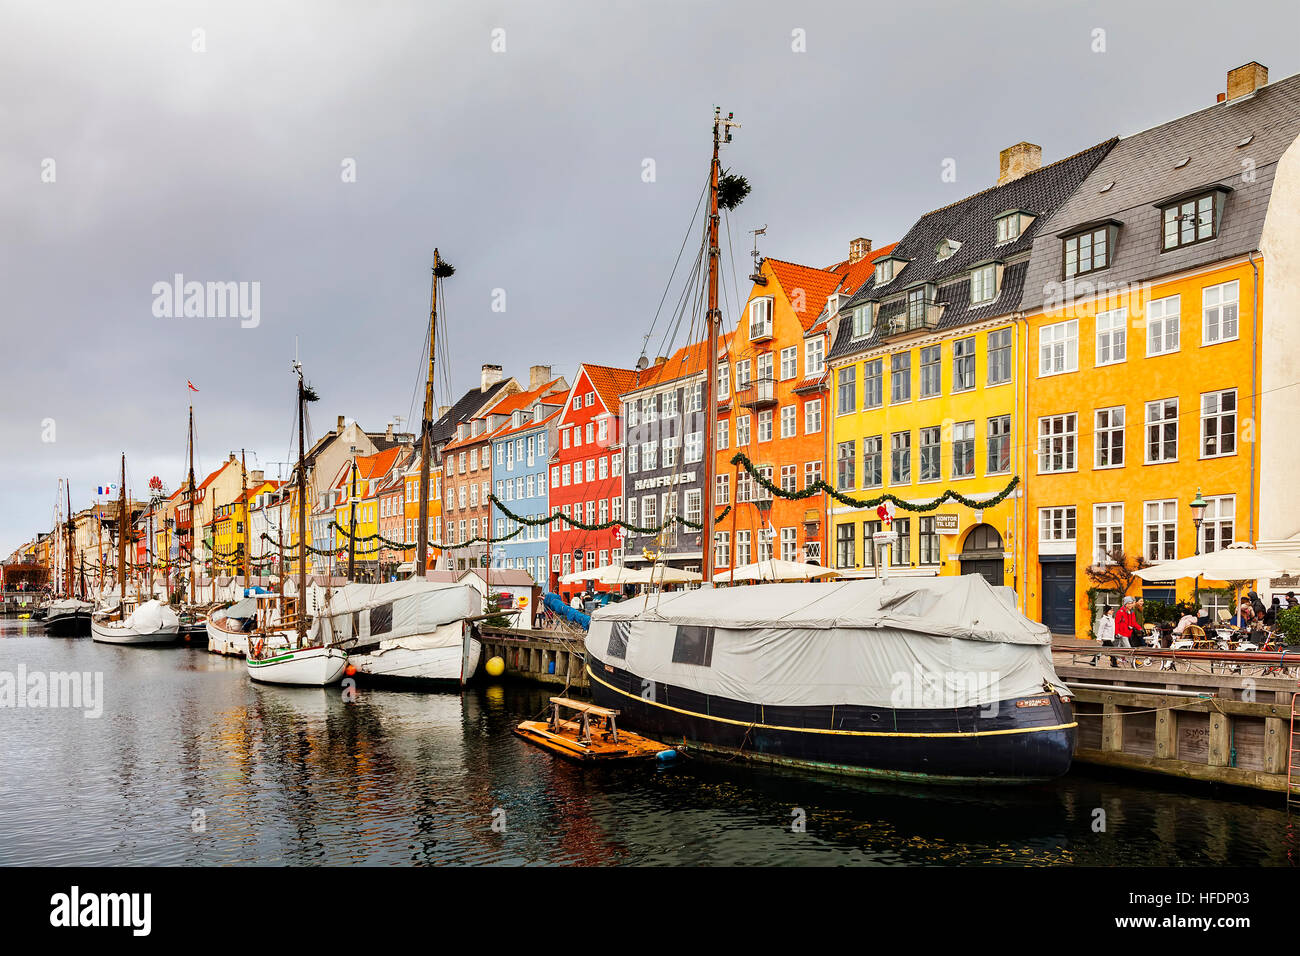 Ships and colourful buildings in the harbour area of Nyhavn. Stock Photo